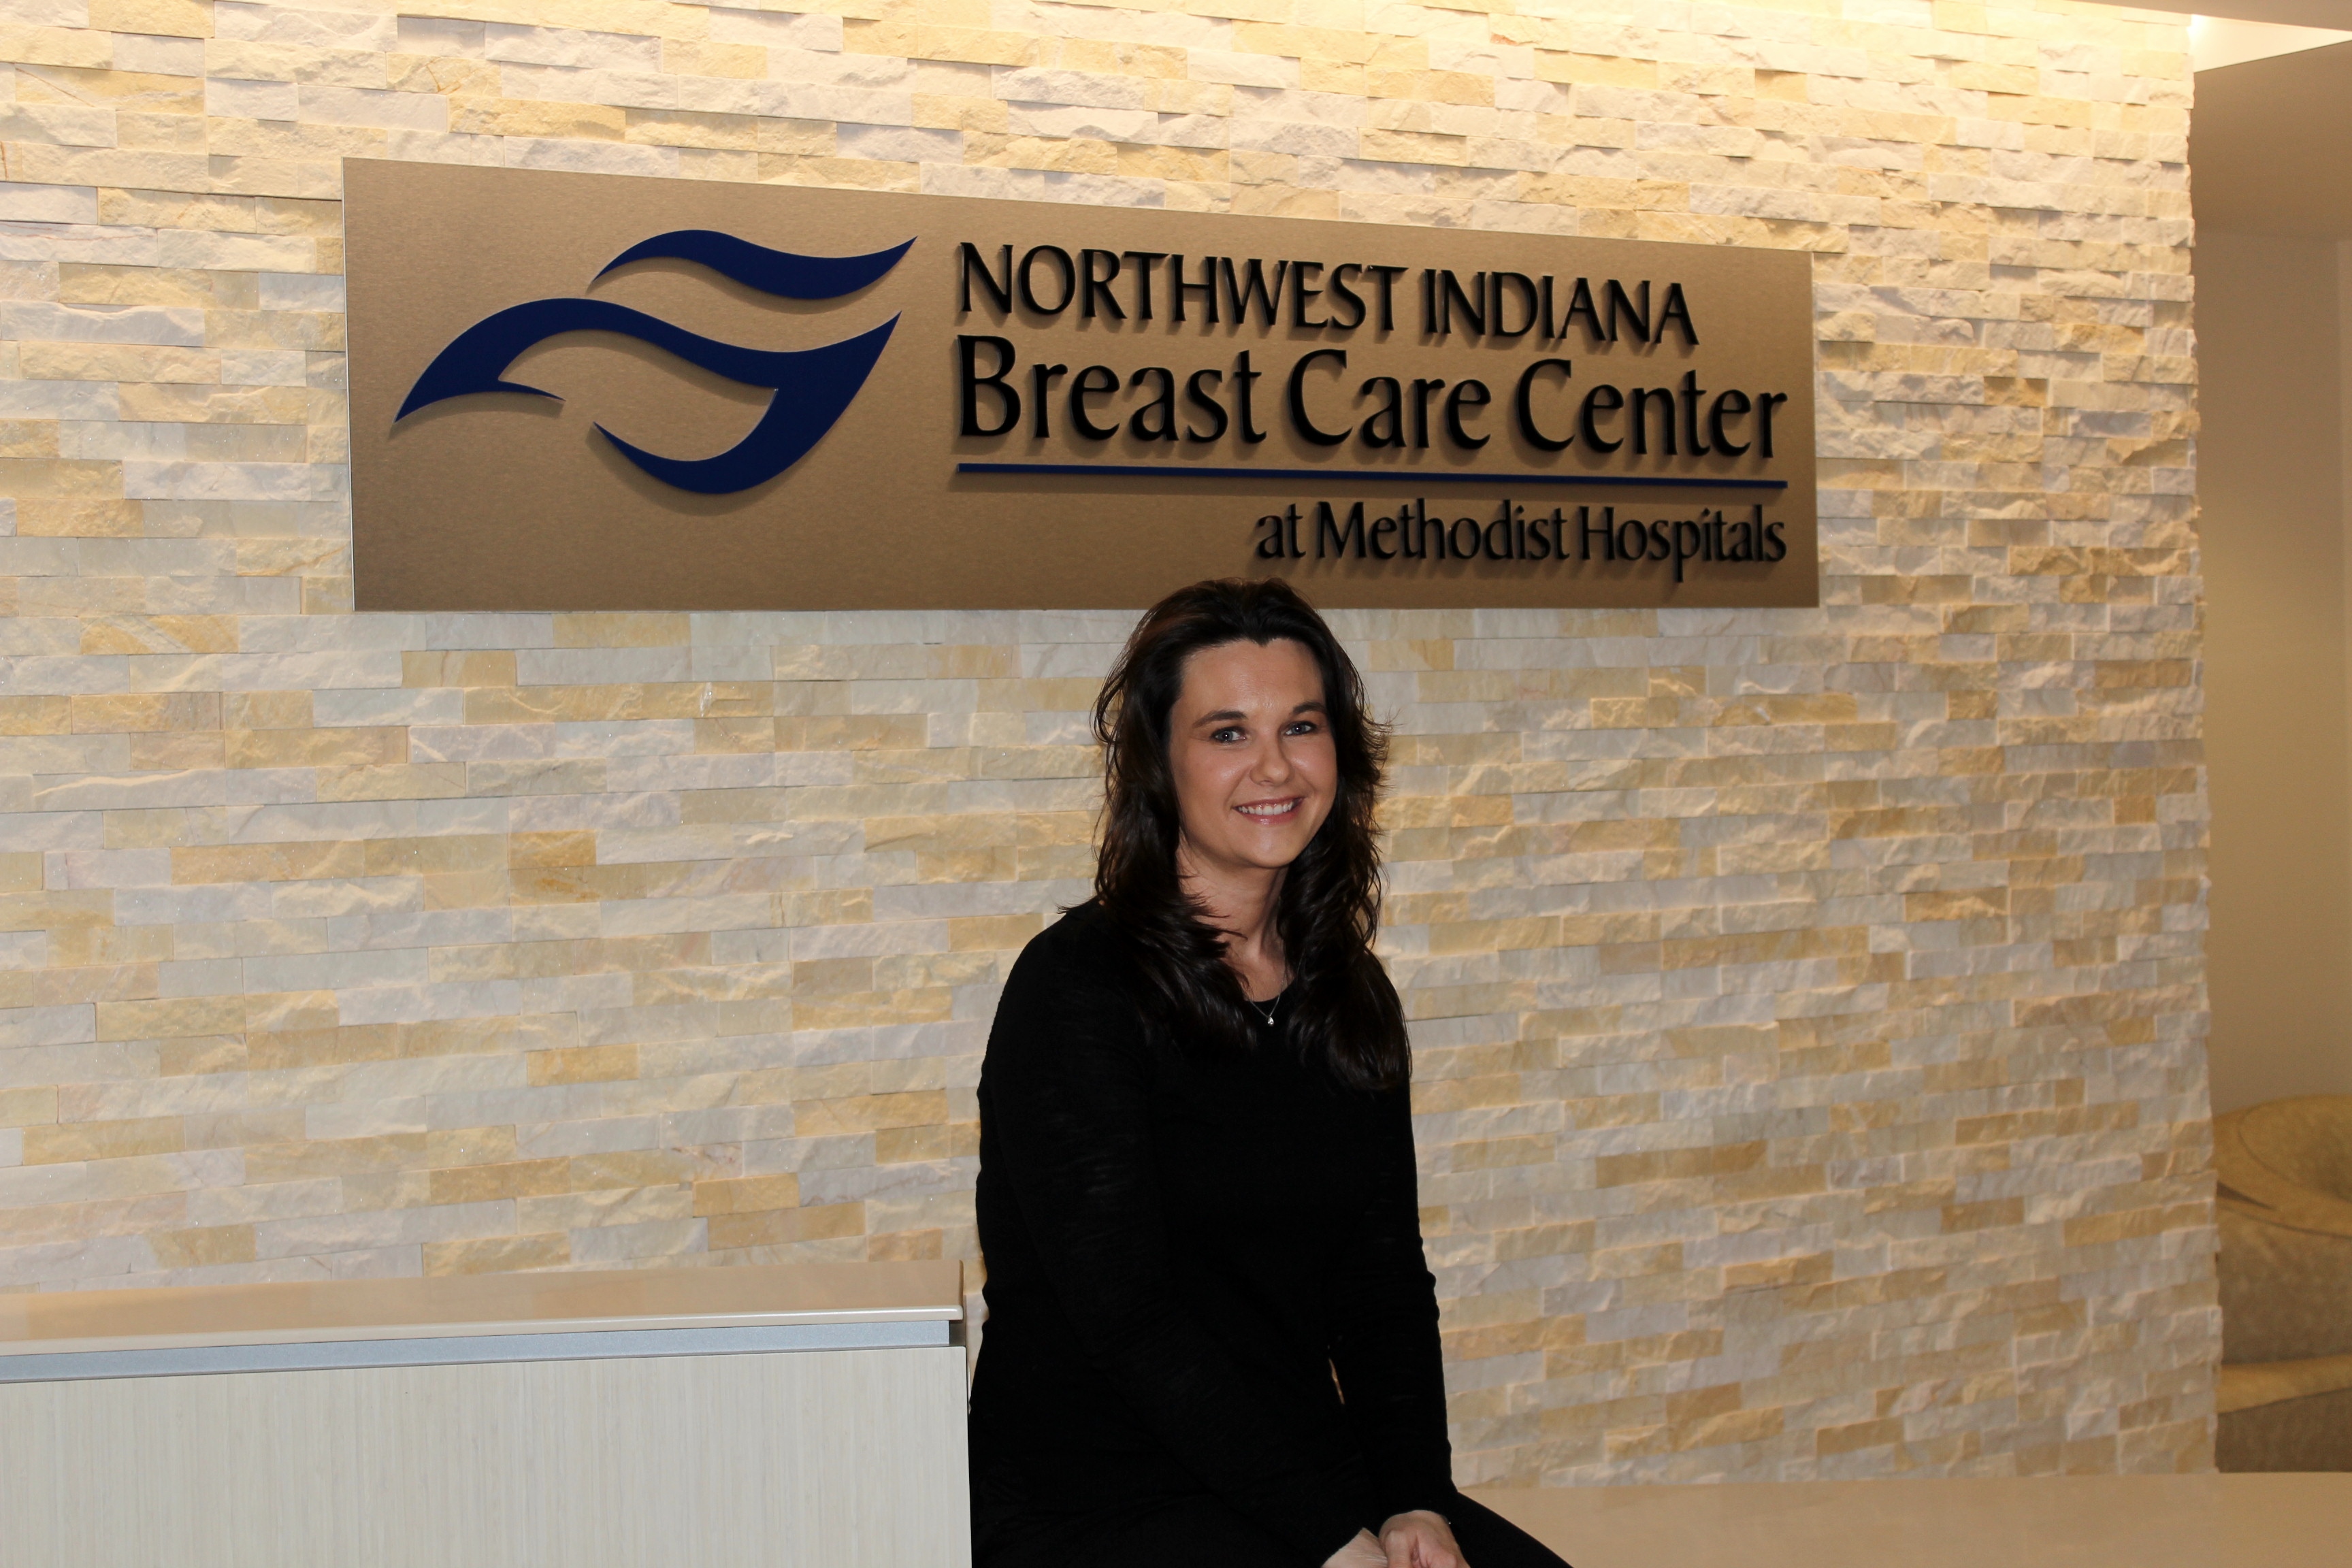 Meet Kim Asher of the Northwest Indiana Breast Care Center at Methodist Hospitals